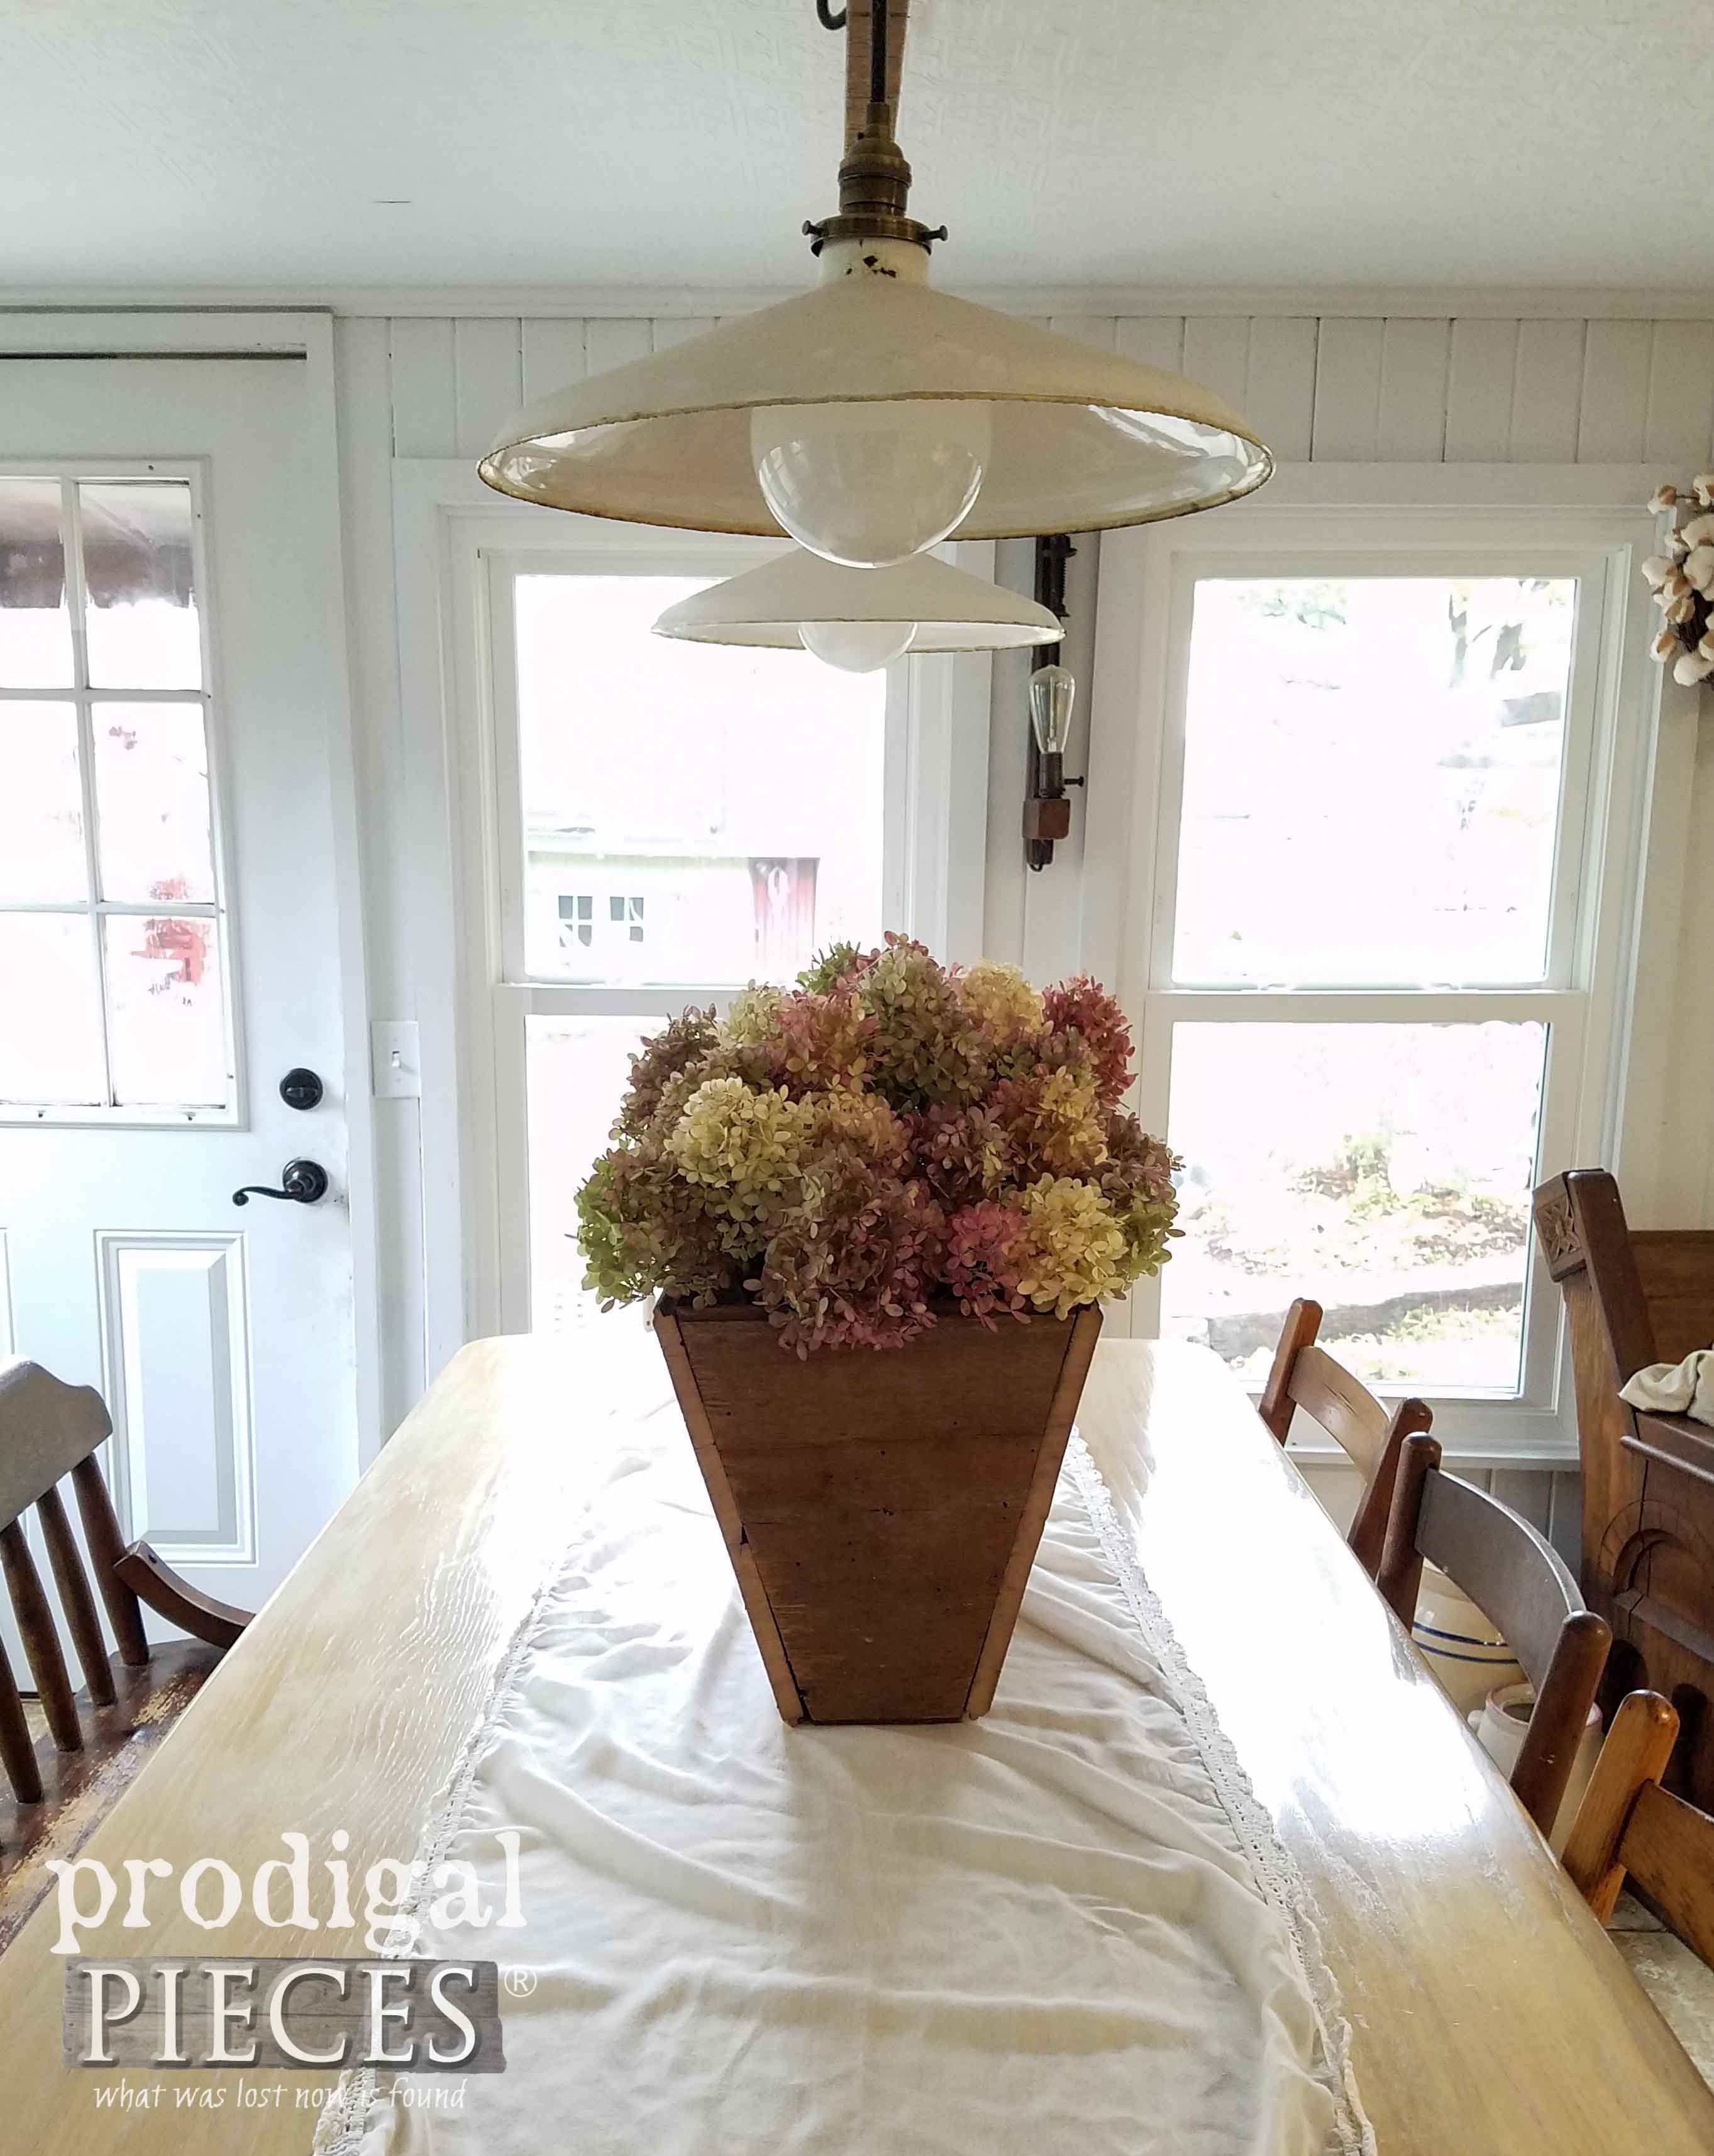 DIY Reclaimed Wood Planter Full of Hydrangea Blooms in Farmhouse Decor by Larissa of Prodigal Pieces | prodigalpieces.com